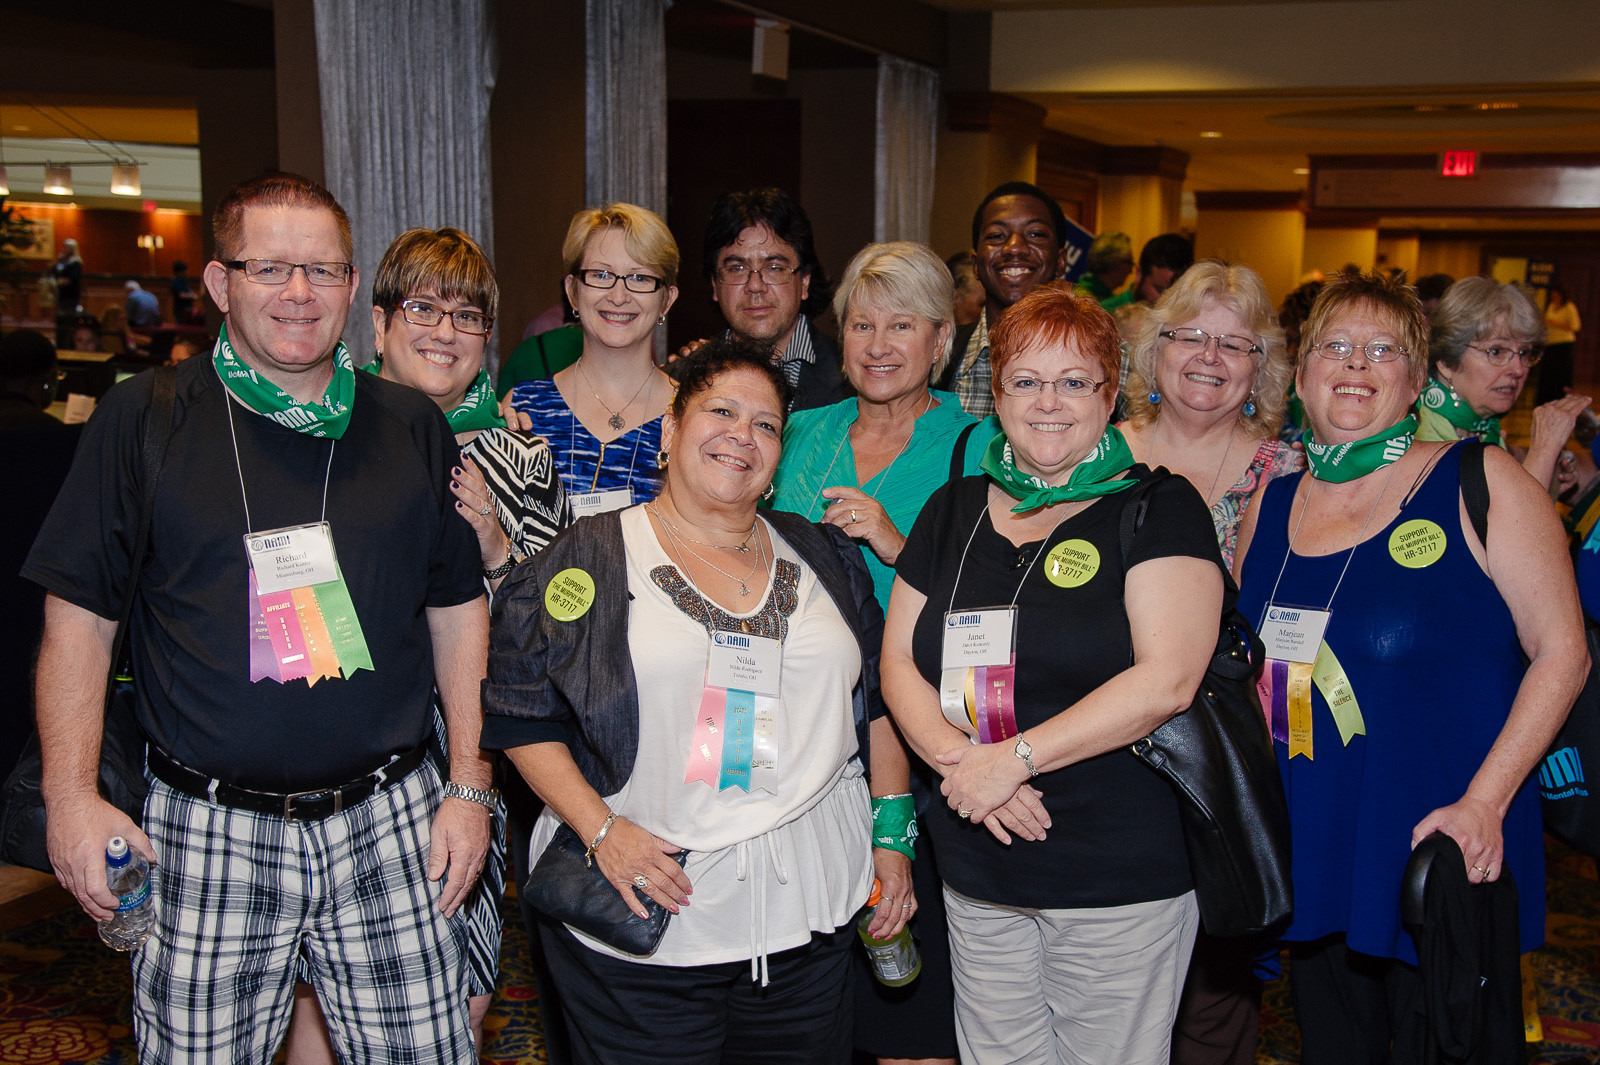 Attendees at the 2014 NAMI Convention